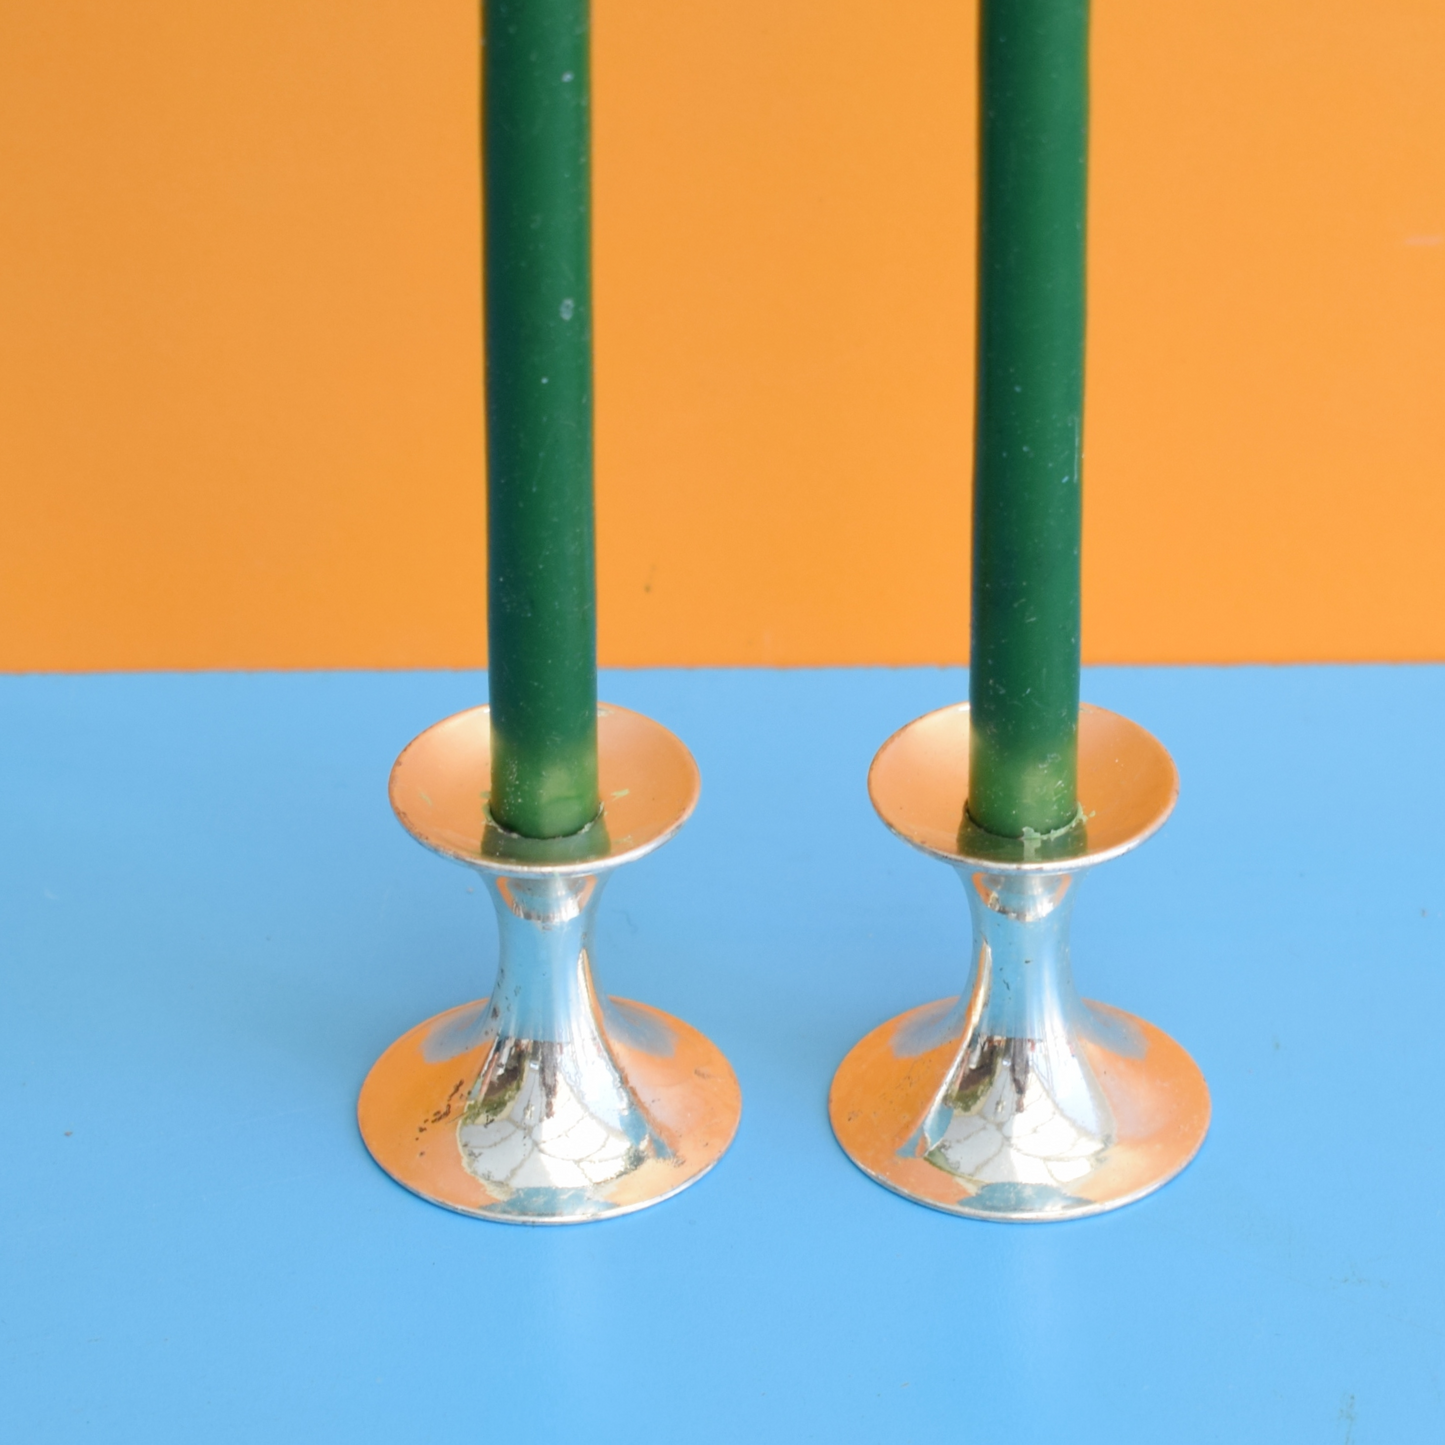 Vintage 1970s Small Chrome Candle Holders / Candles